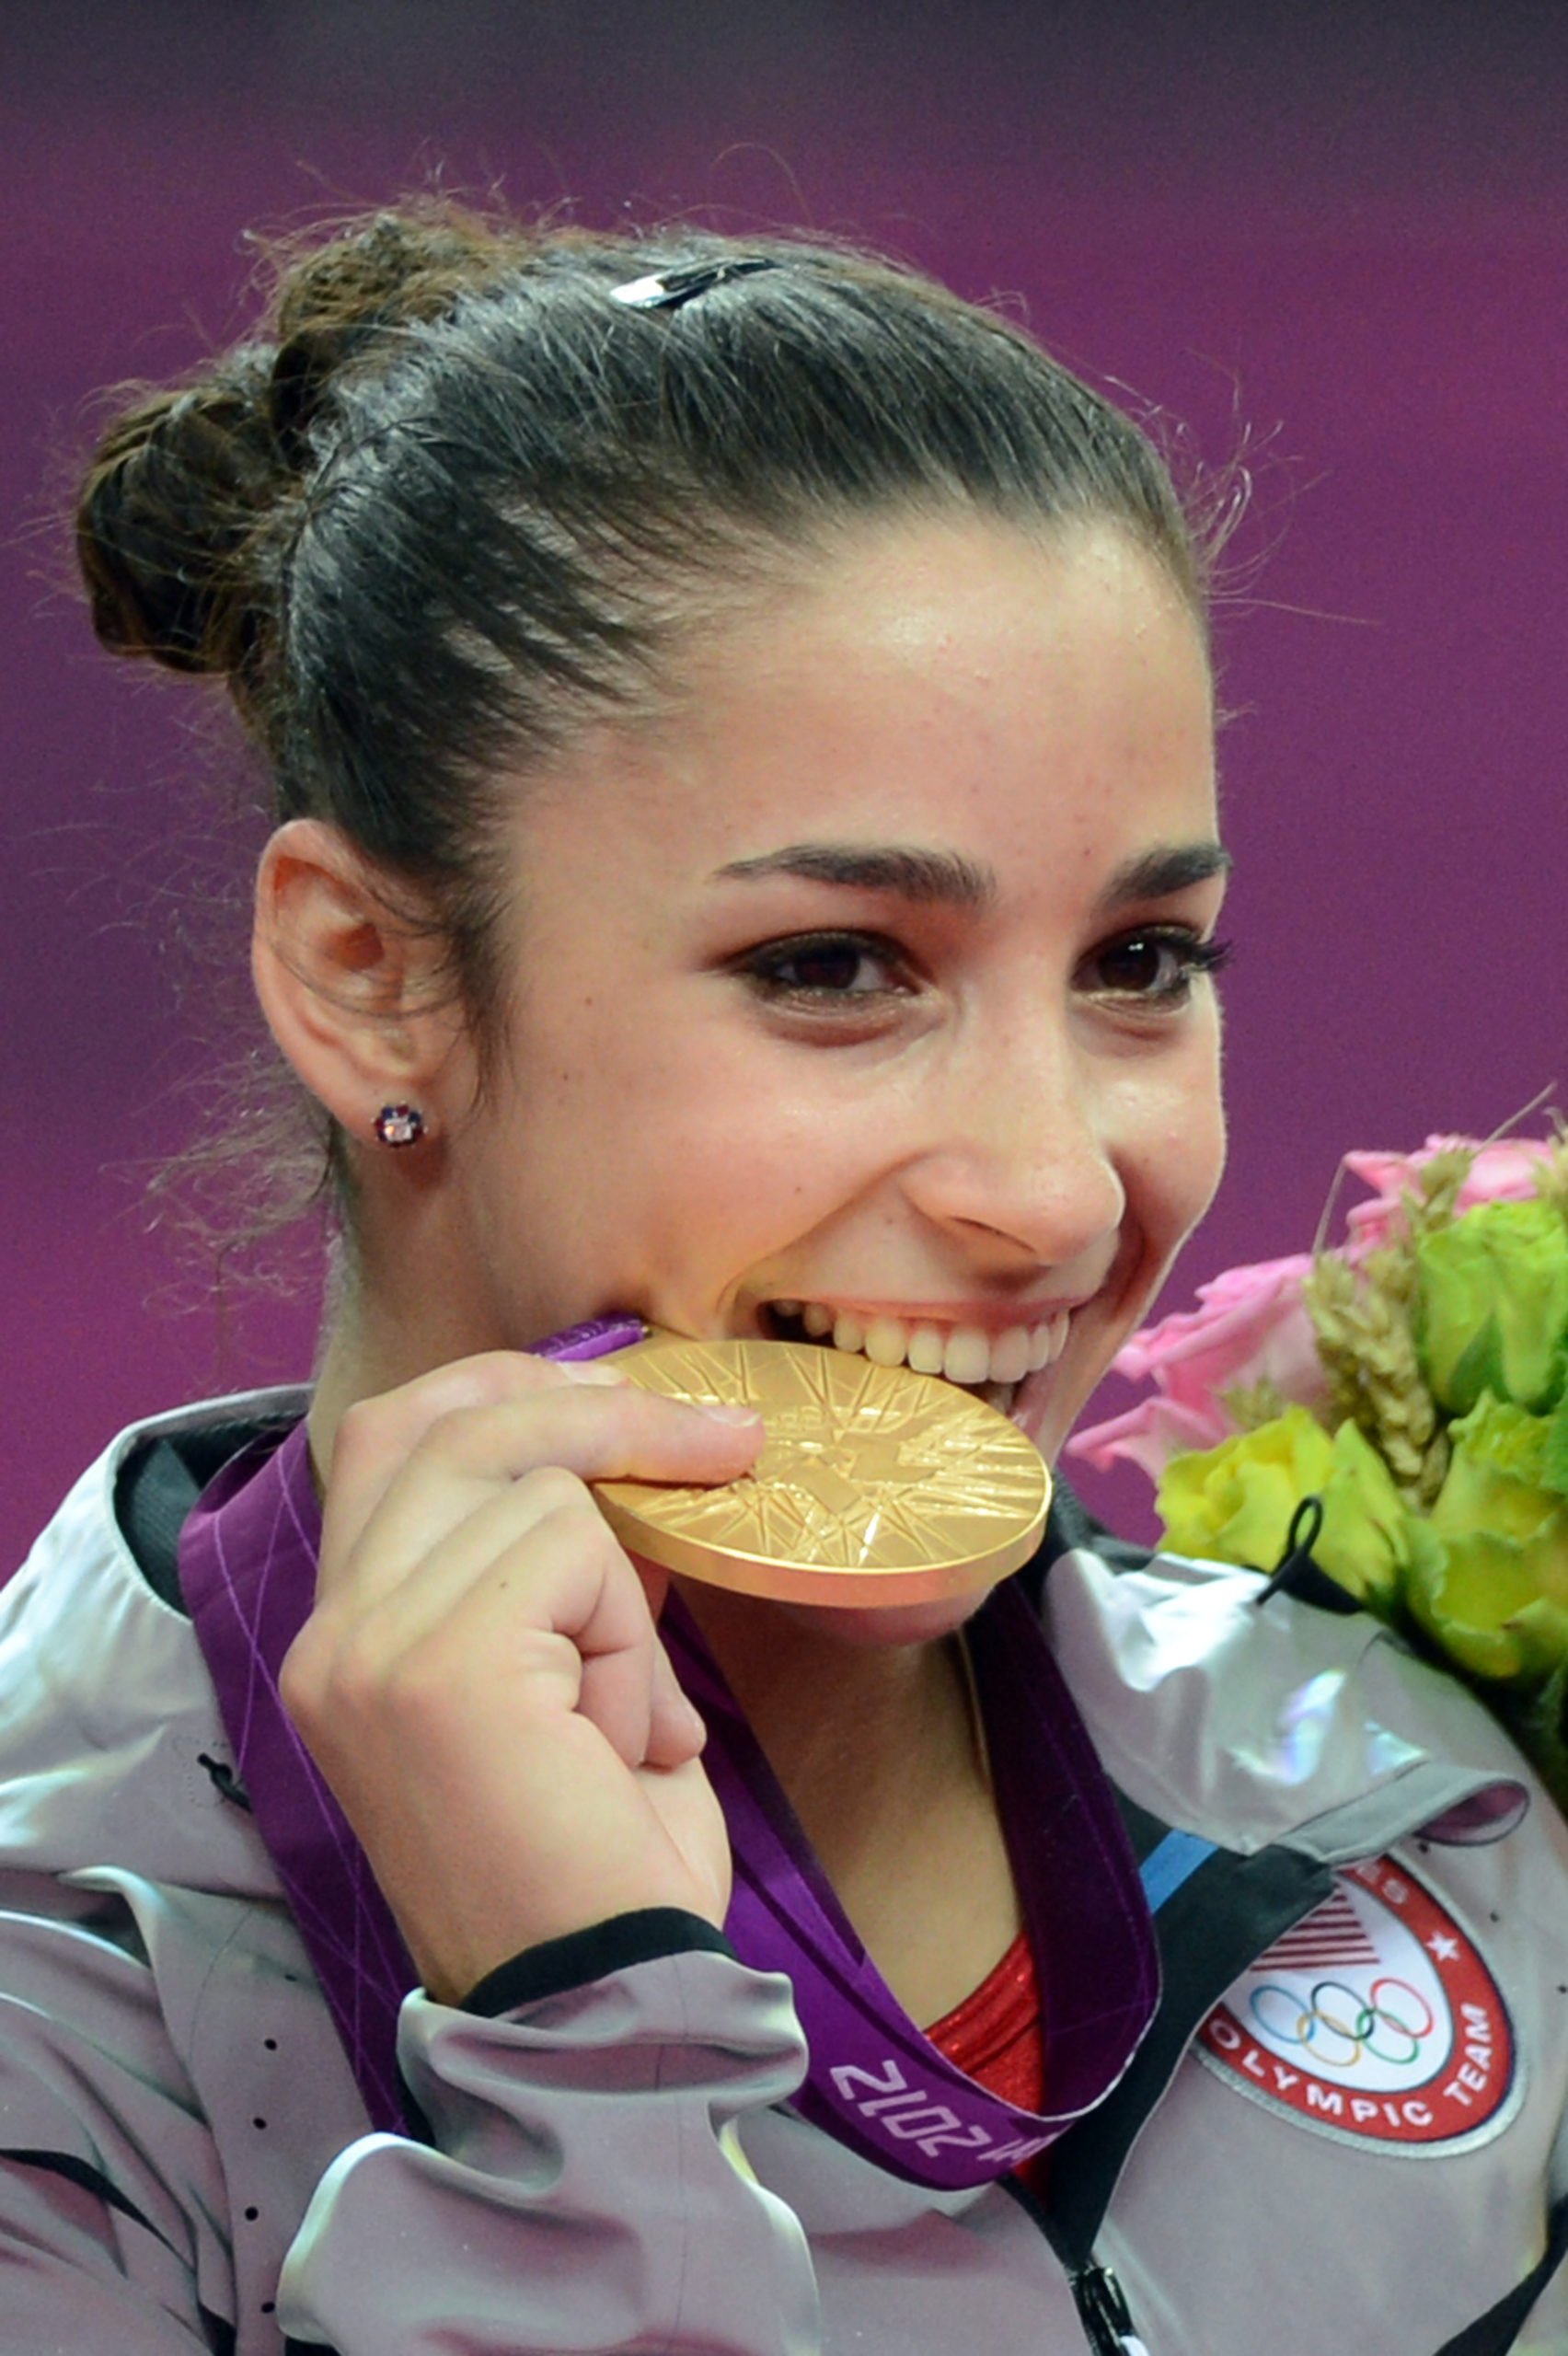 US gymnast Alexandra Raisman celebrates with the gold medal on the podium of the women's team final of the artistic gymnastics event of the London Olympic Games on July 31, 2012 at the 02 North Greenwich Arena in London. EMMANUEL DUNAND/AFP via Getty Images